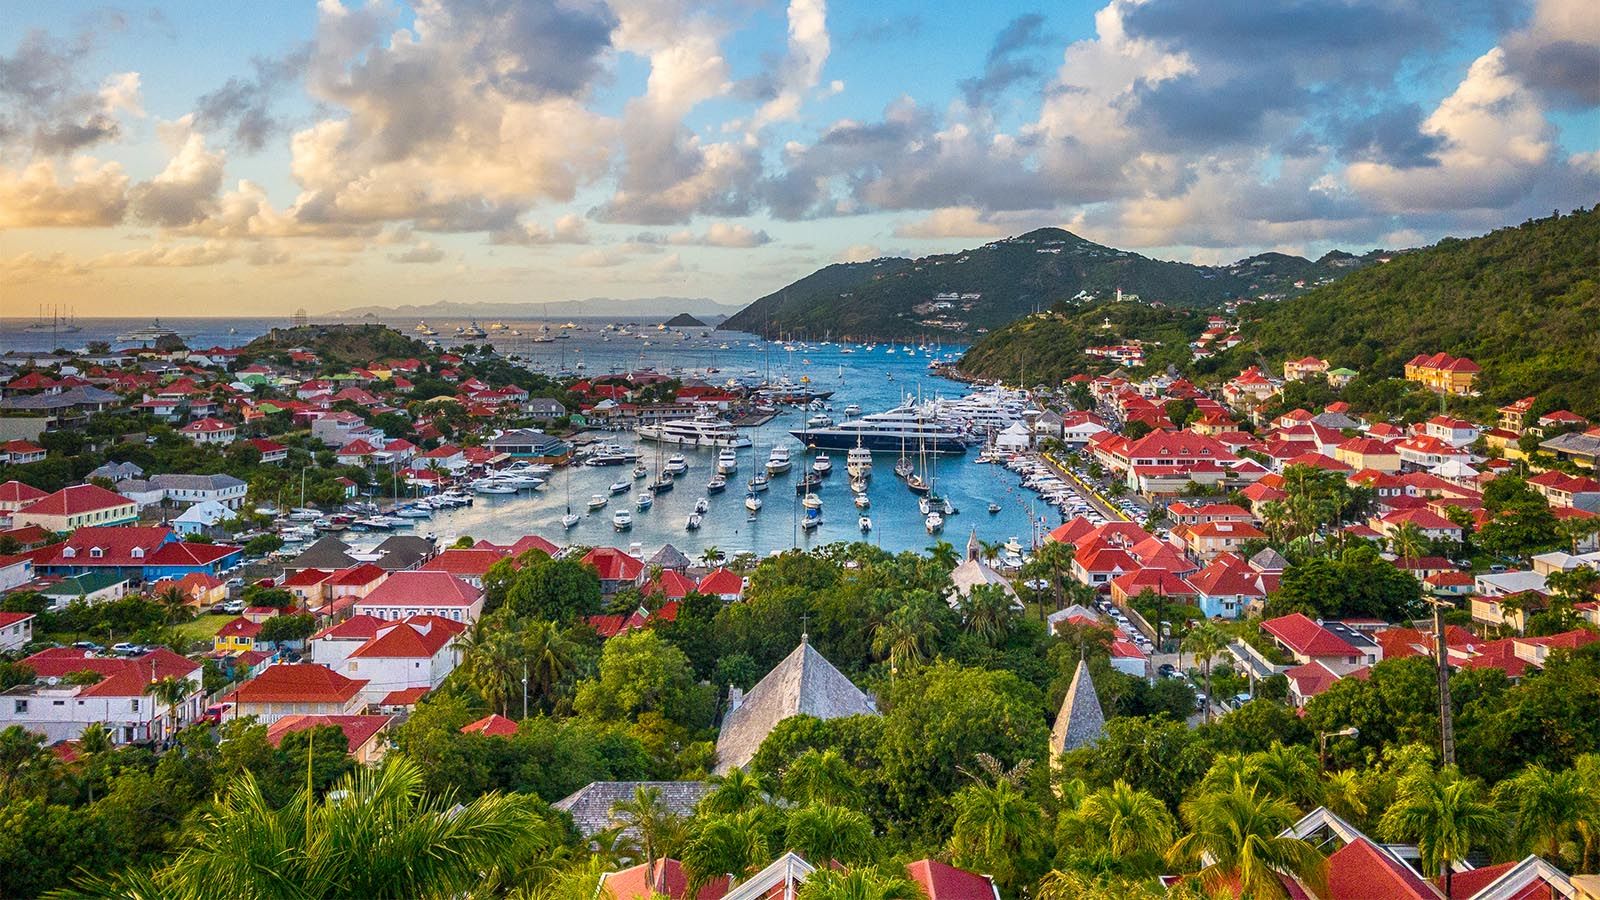 Gustavia St. Barth - Food and Drink Tips